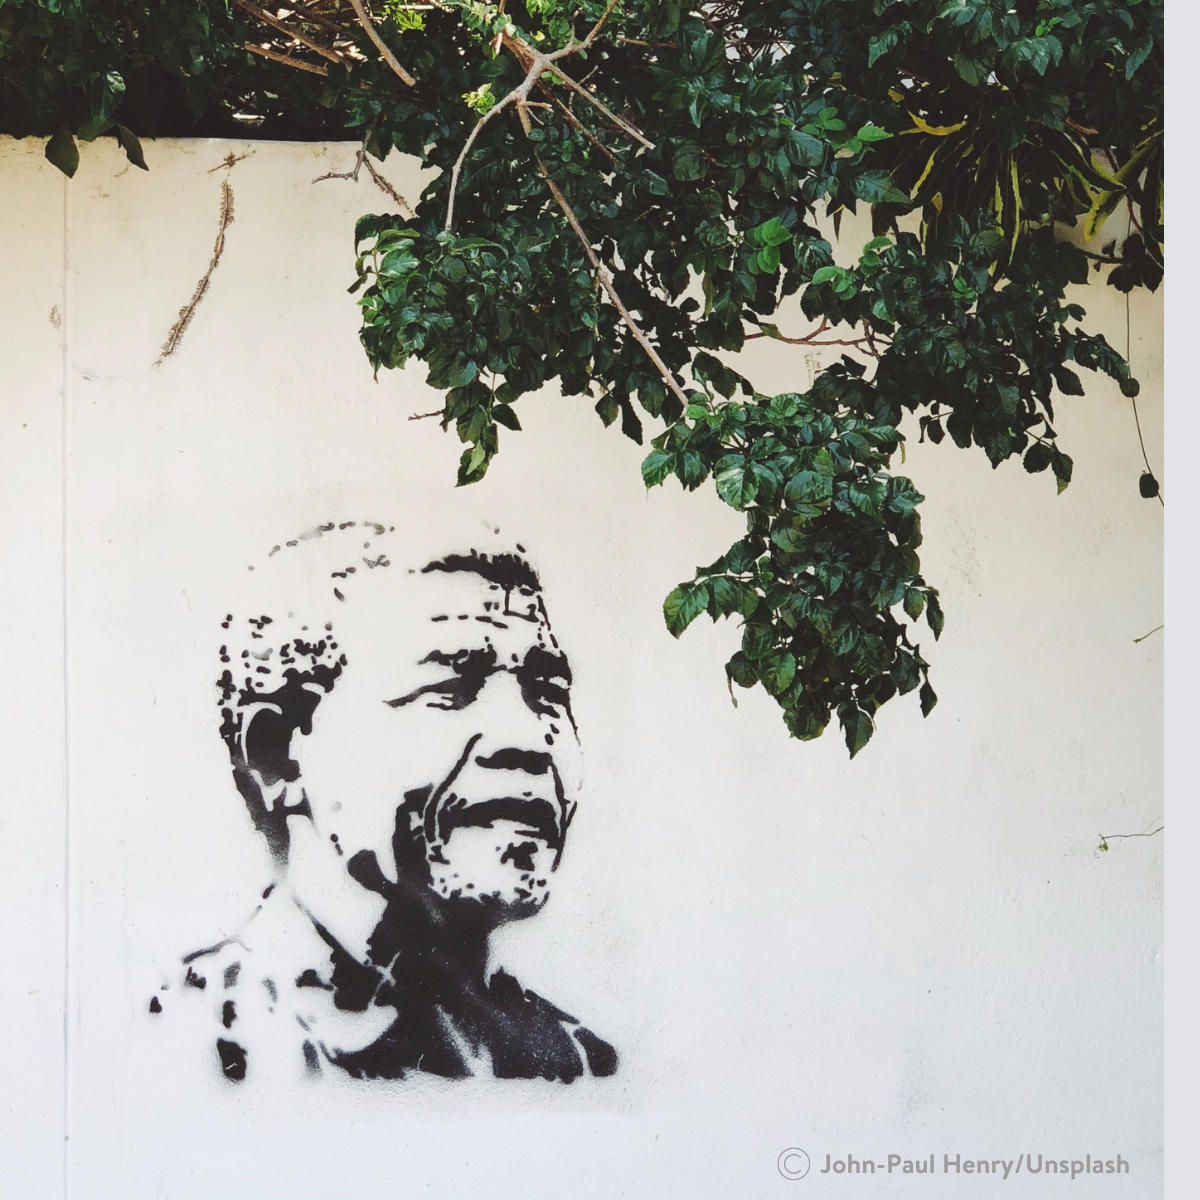 Nelson Mandela's imprint on a wall in South Africa